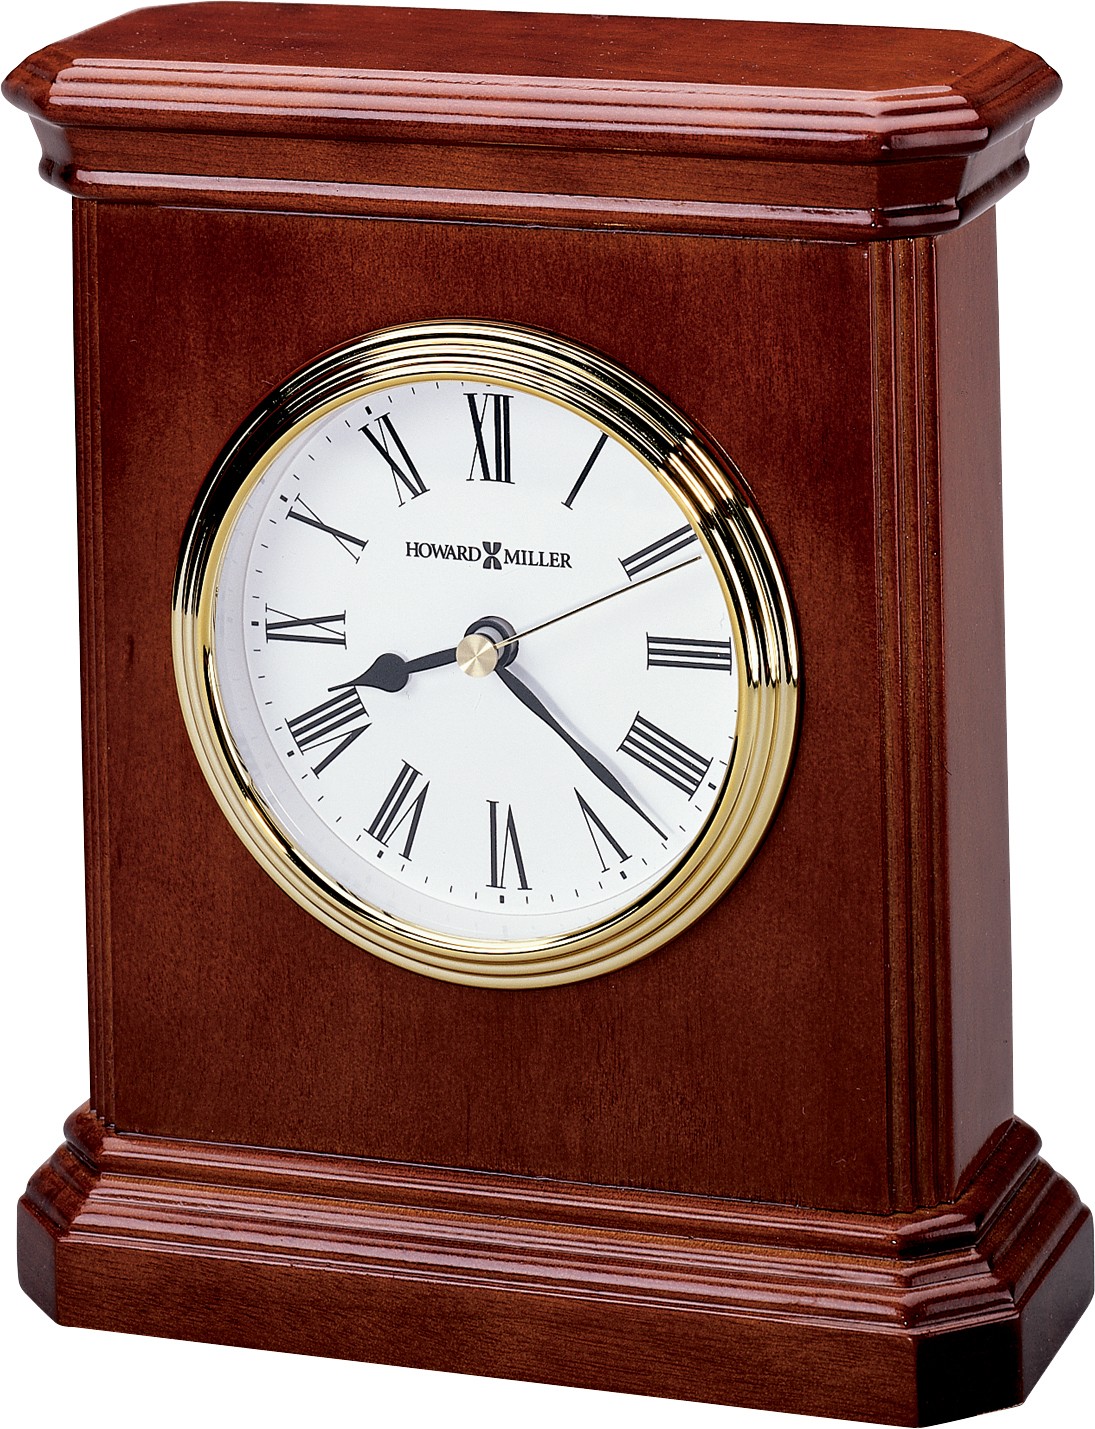 Cherry wood clock with brass accents